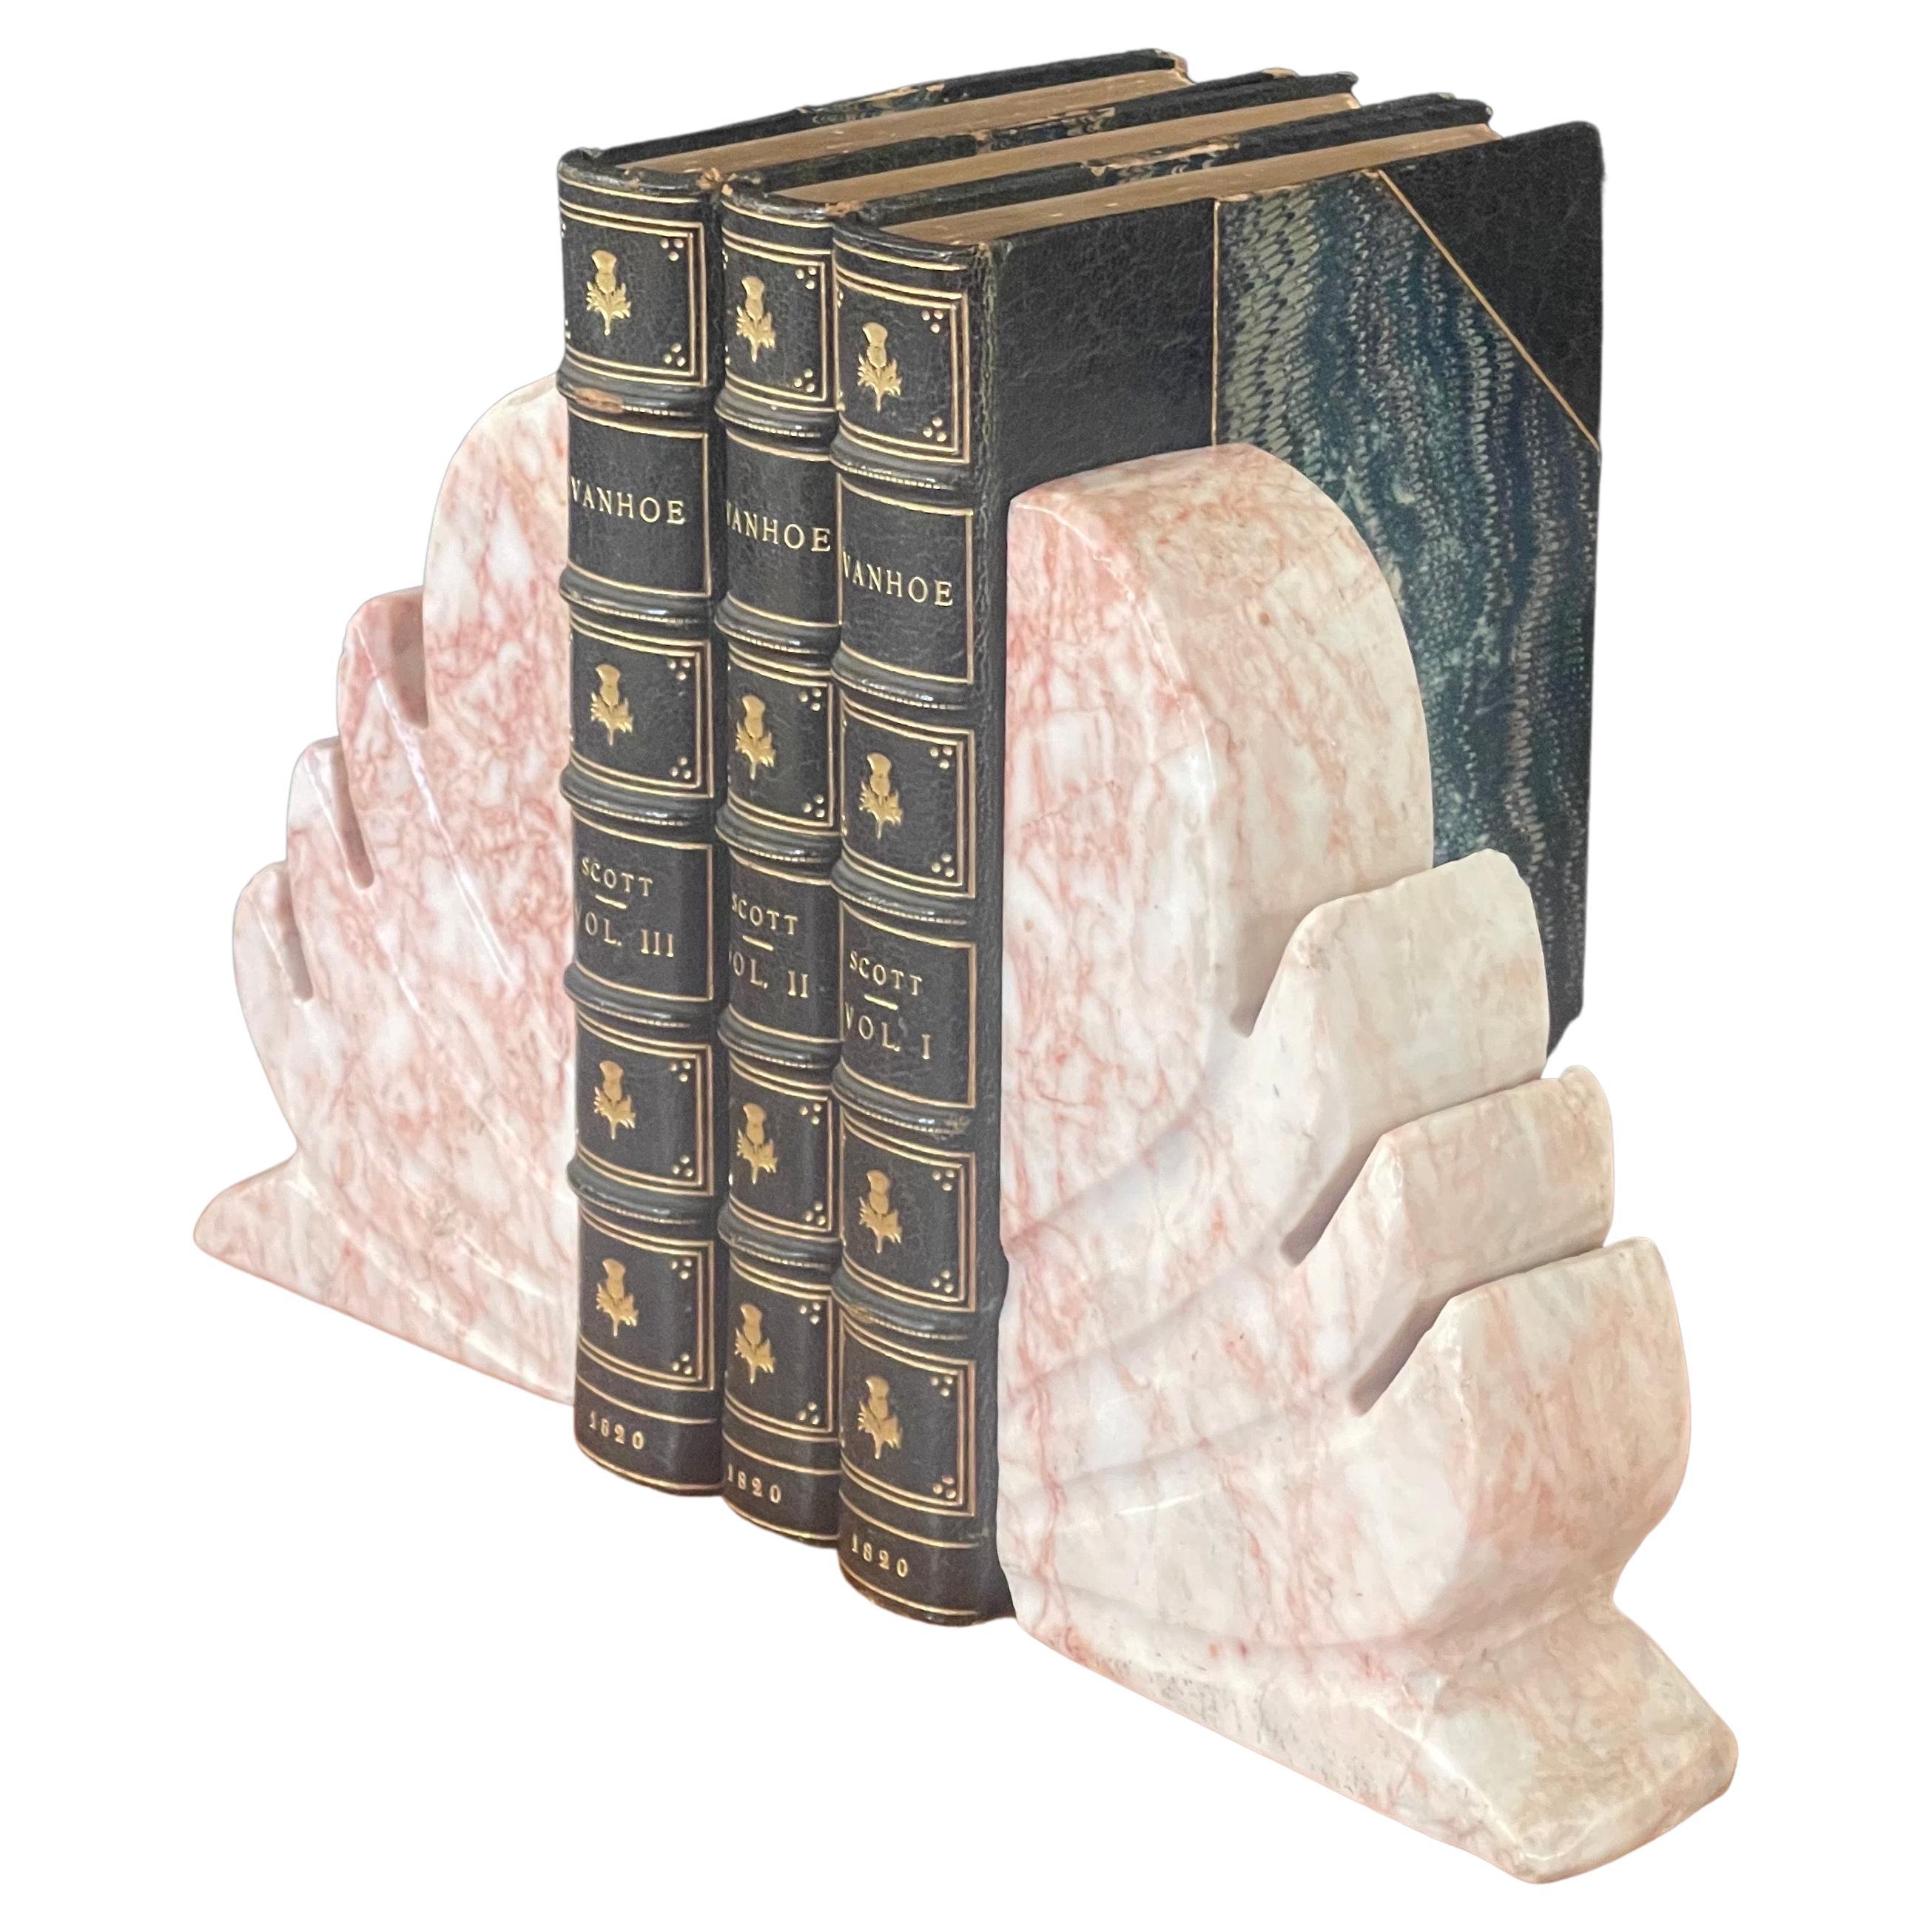 Pair of fleur de lis style marble bookends, circa 1940s. The bookends are heavy and solid and well crafted. They measure 8